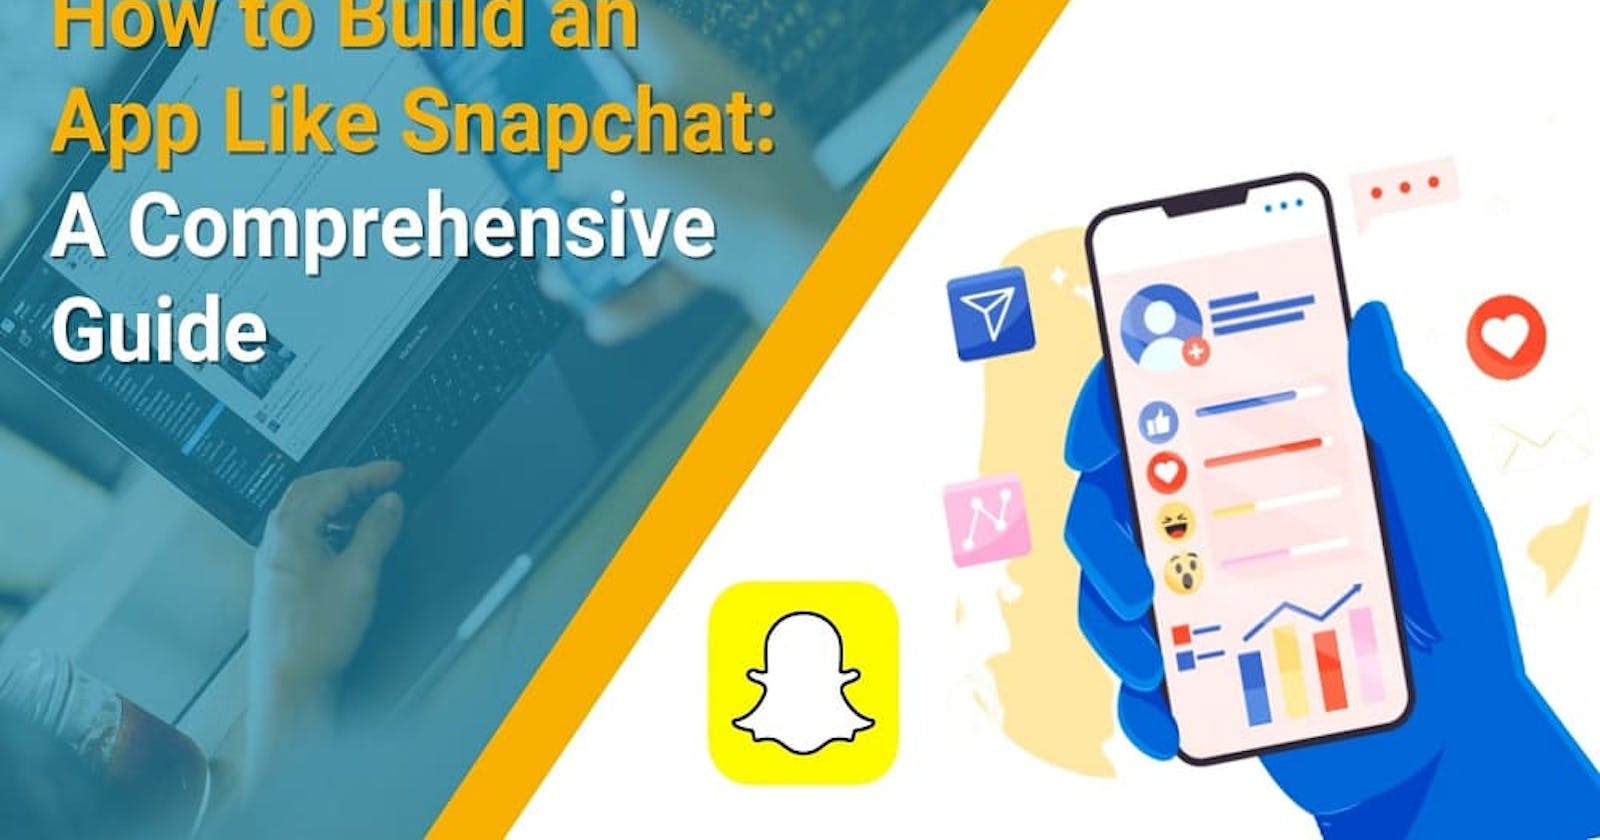 How to Build an App Like Snapchat: A Comprehensive Guide